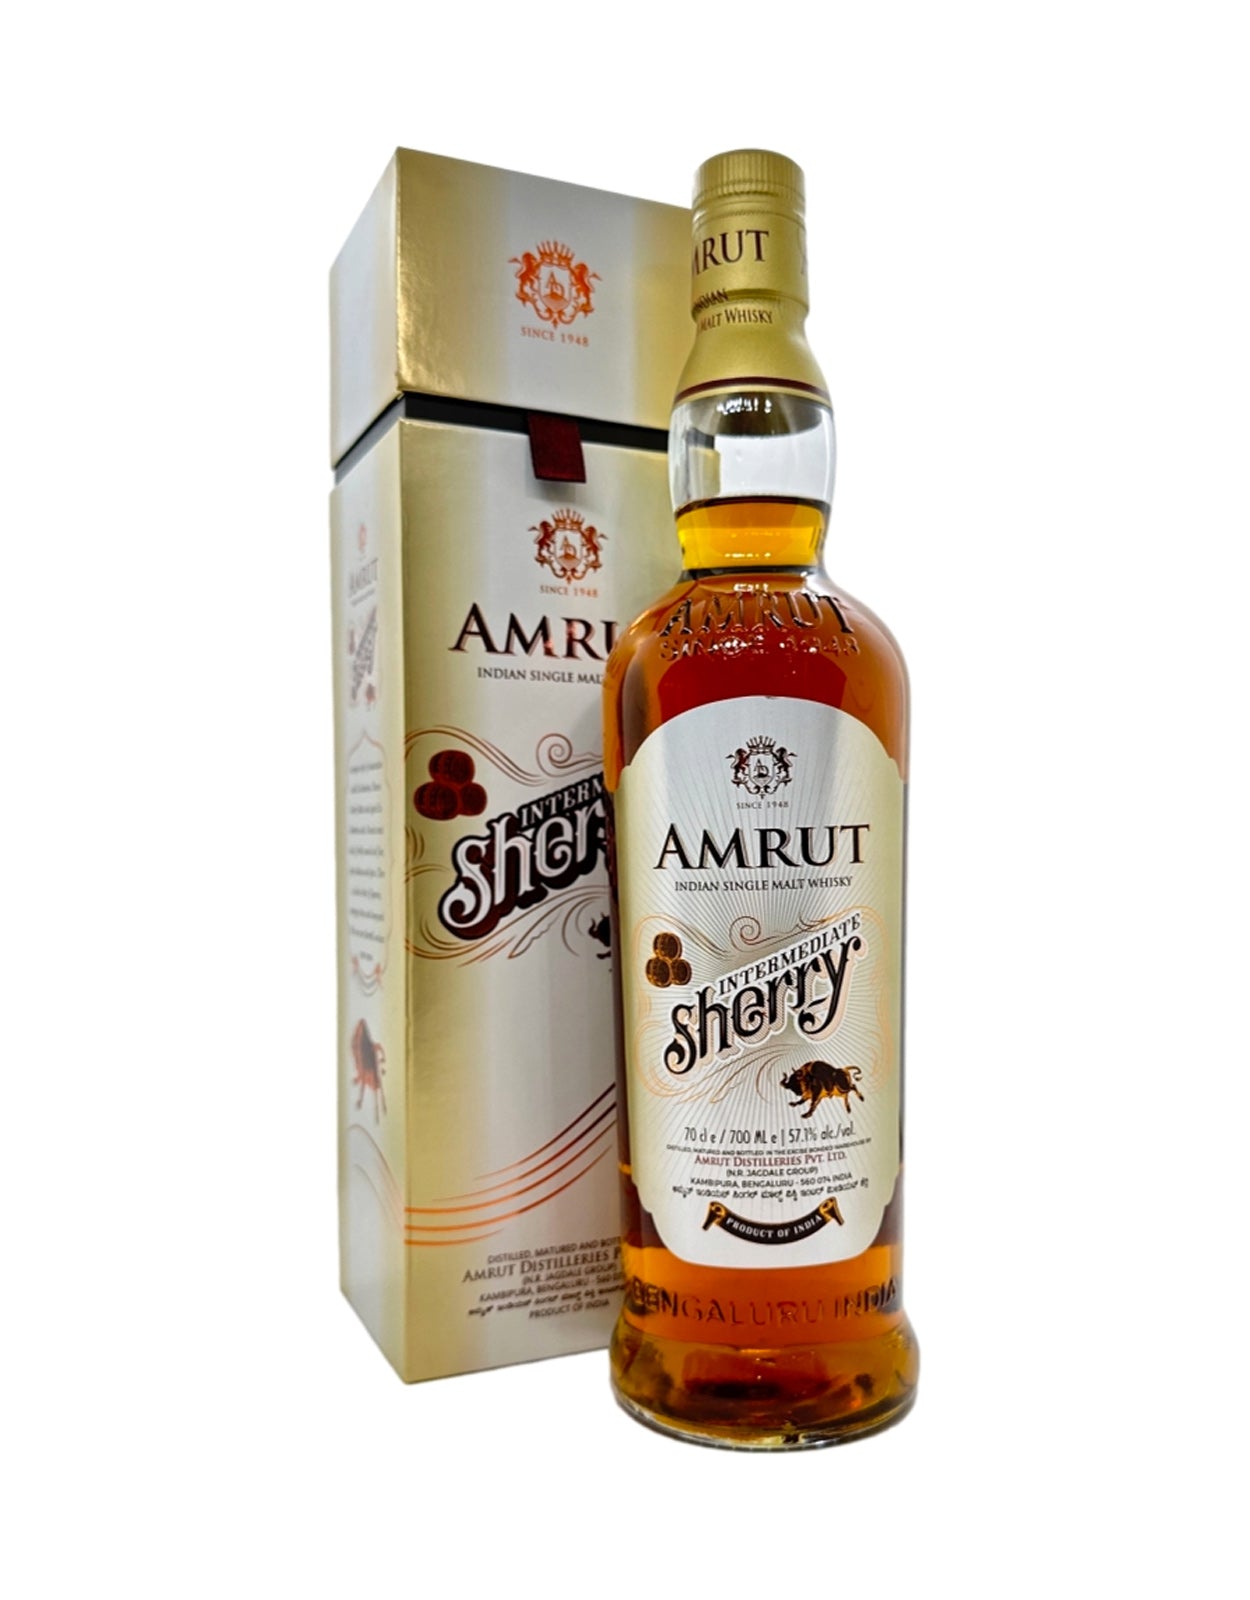 Sherry Products with Price